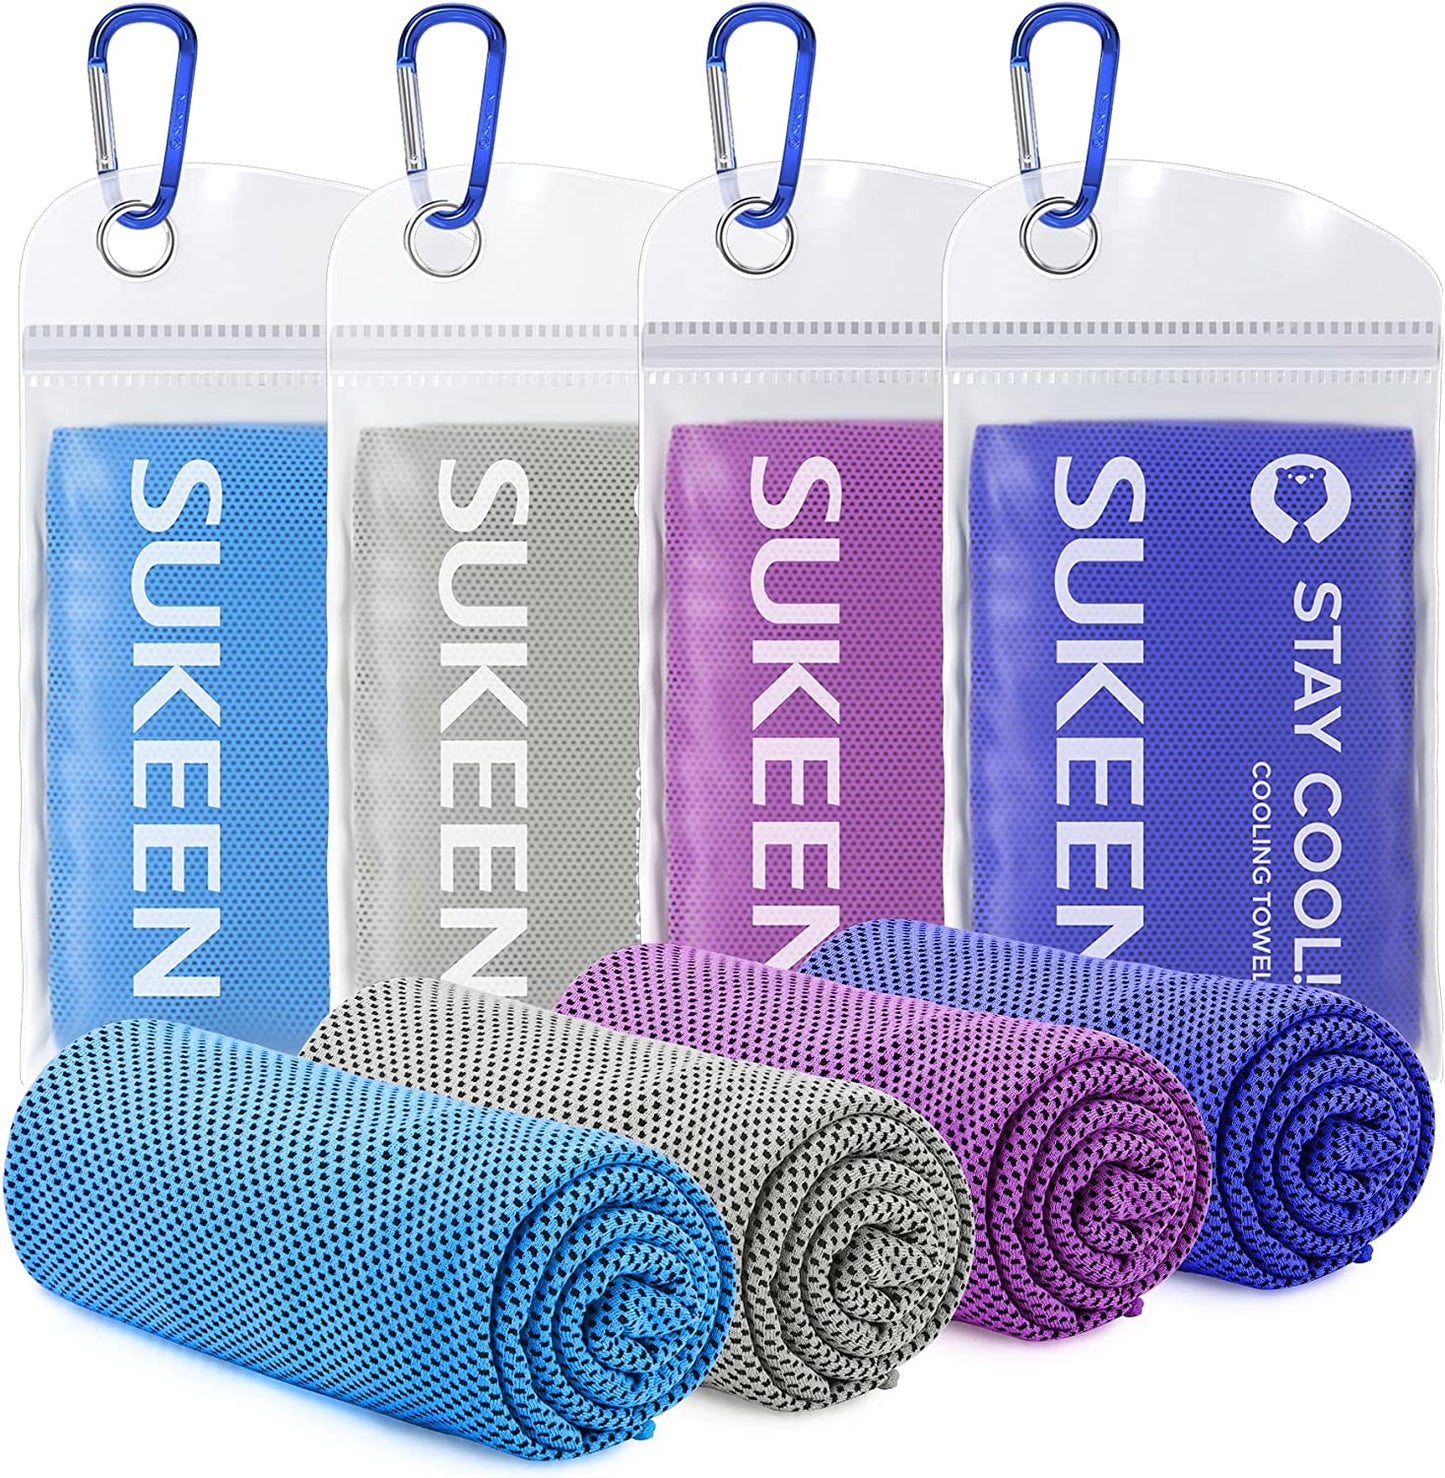 [4 Pack Cooling Towel (40"X12"), Ice Towel, Soft Breathable Chilly Towel, Microfiber Towel for Yoga, Sport, Running, Gym, Workout,Camping, Fitness, Workout & More Activities